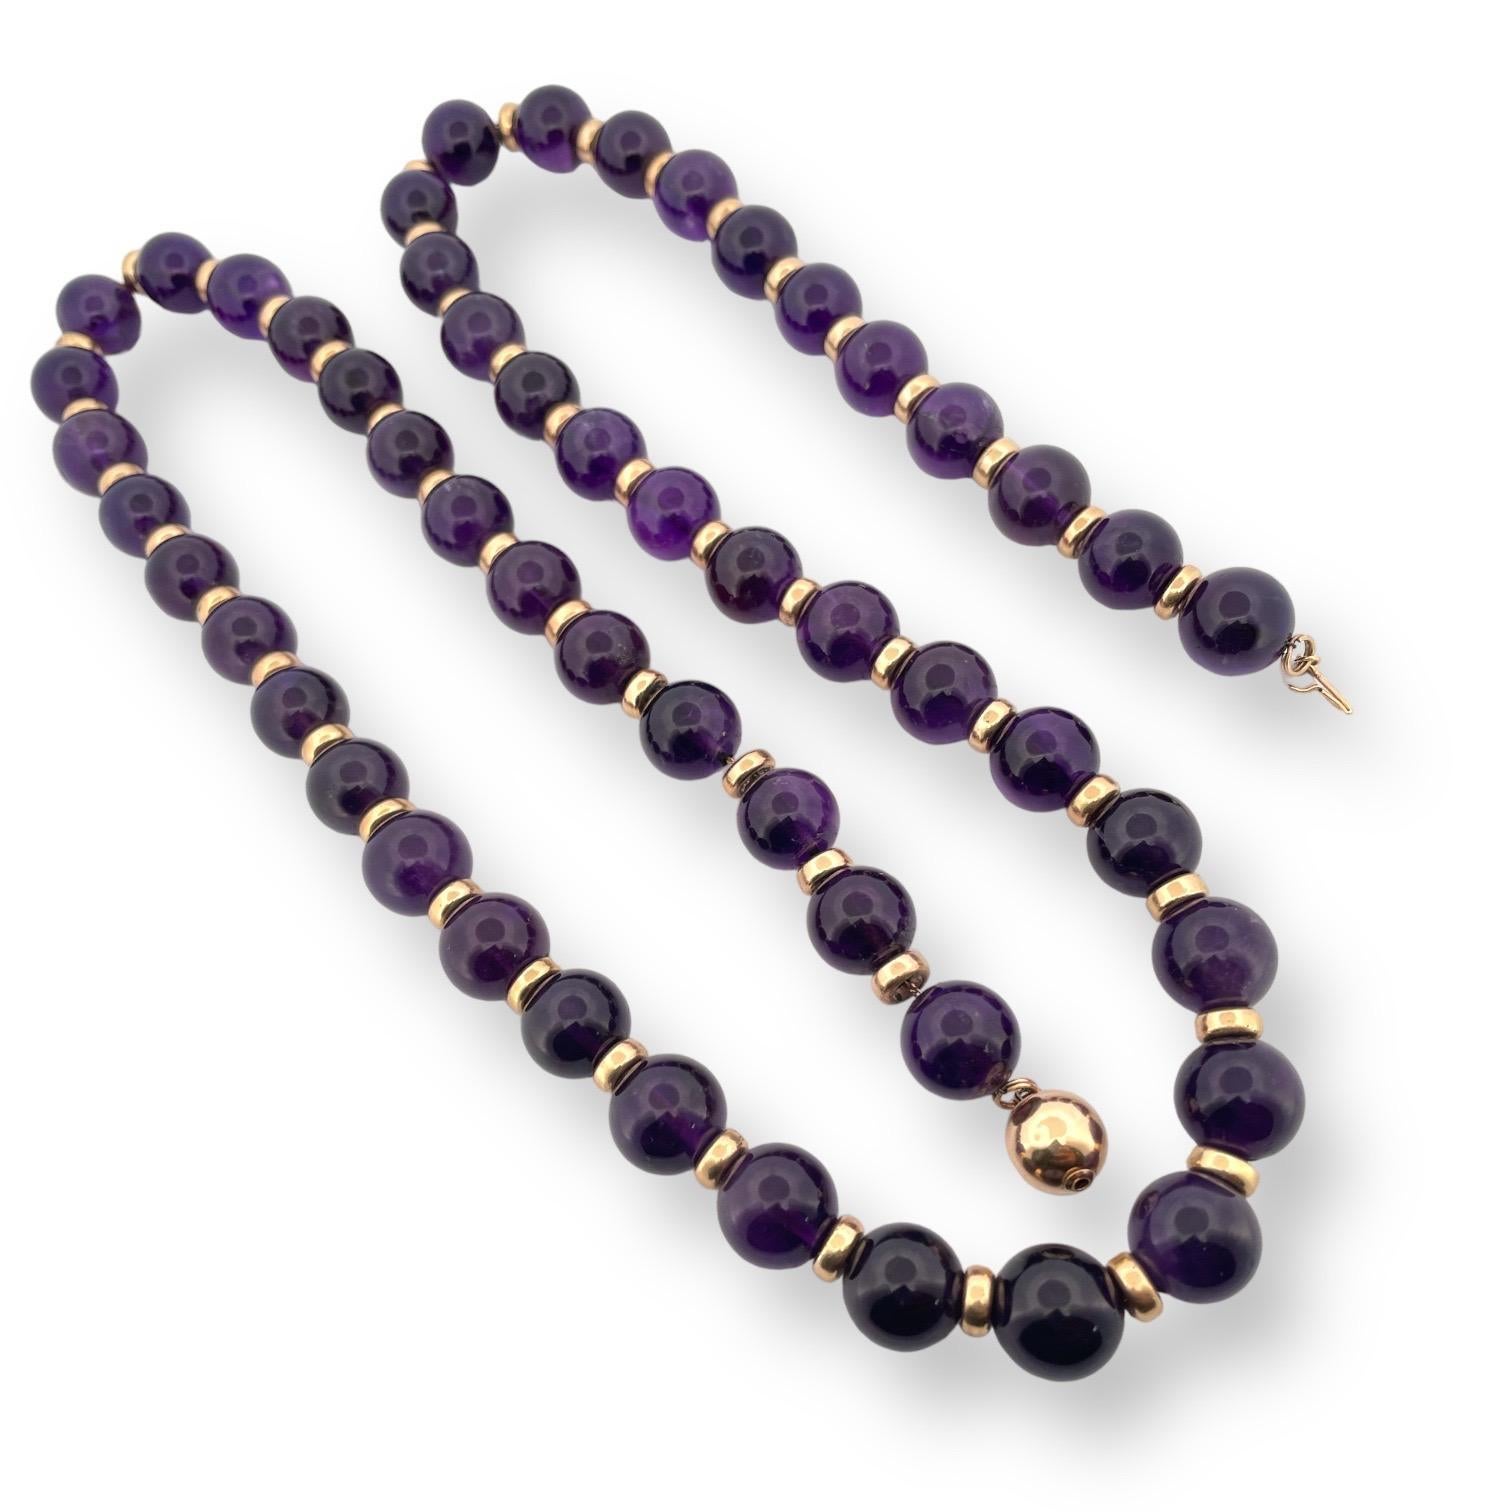 Introducing our magnificent 14K Yellow Gold Necklace, adorned with lustrous Amethyst Beads and Gold Spacers, presenting a perfect blend of luxury and mystique. Spanning a generous length of 30 inches, this necklace drapes beautifully, offering a